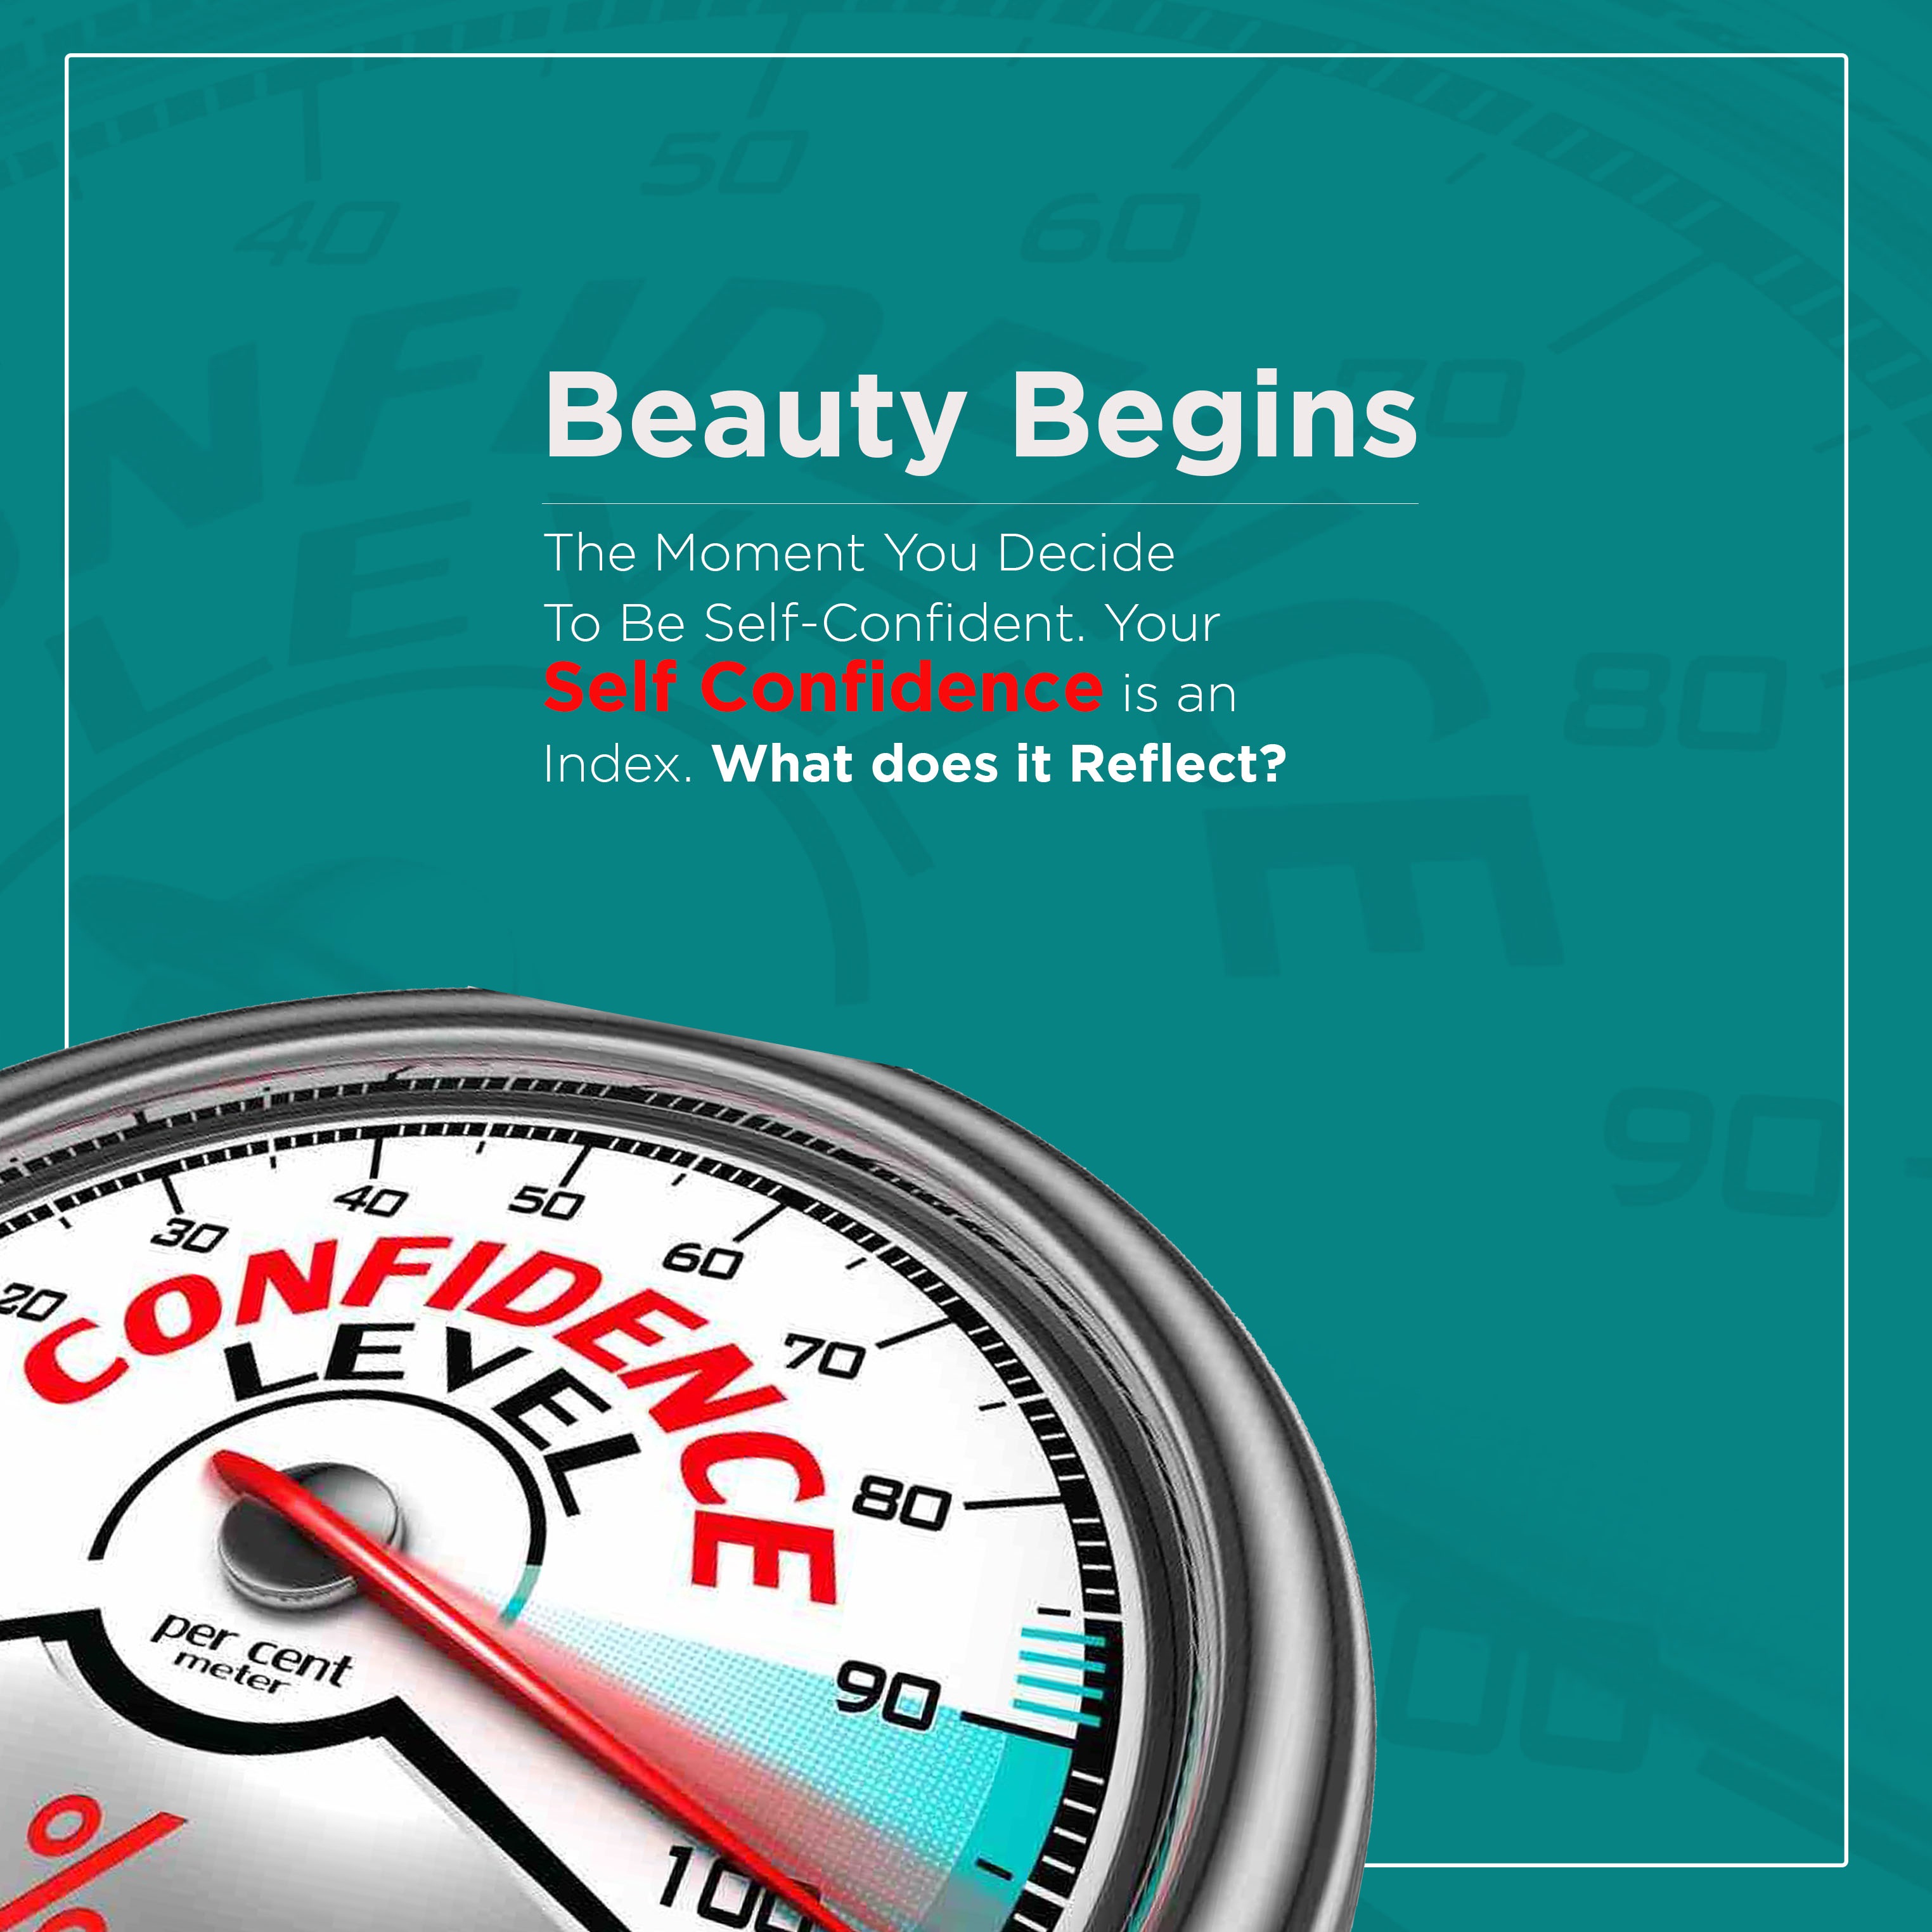 Beauty Begins The Moment You Decide To Be Self-Confident._soulconjuction.com